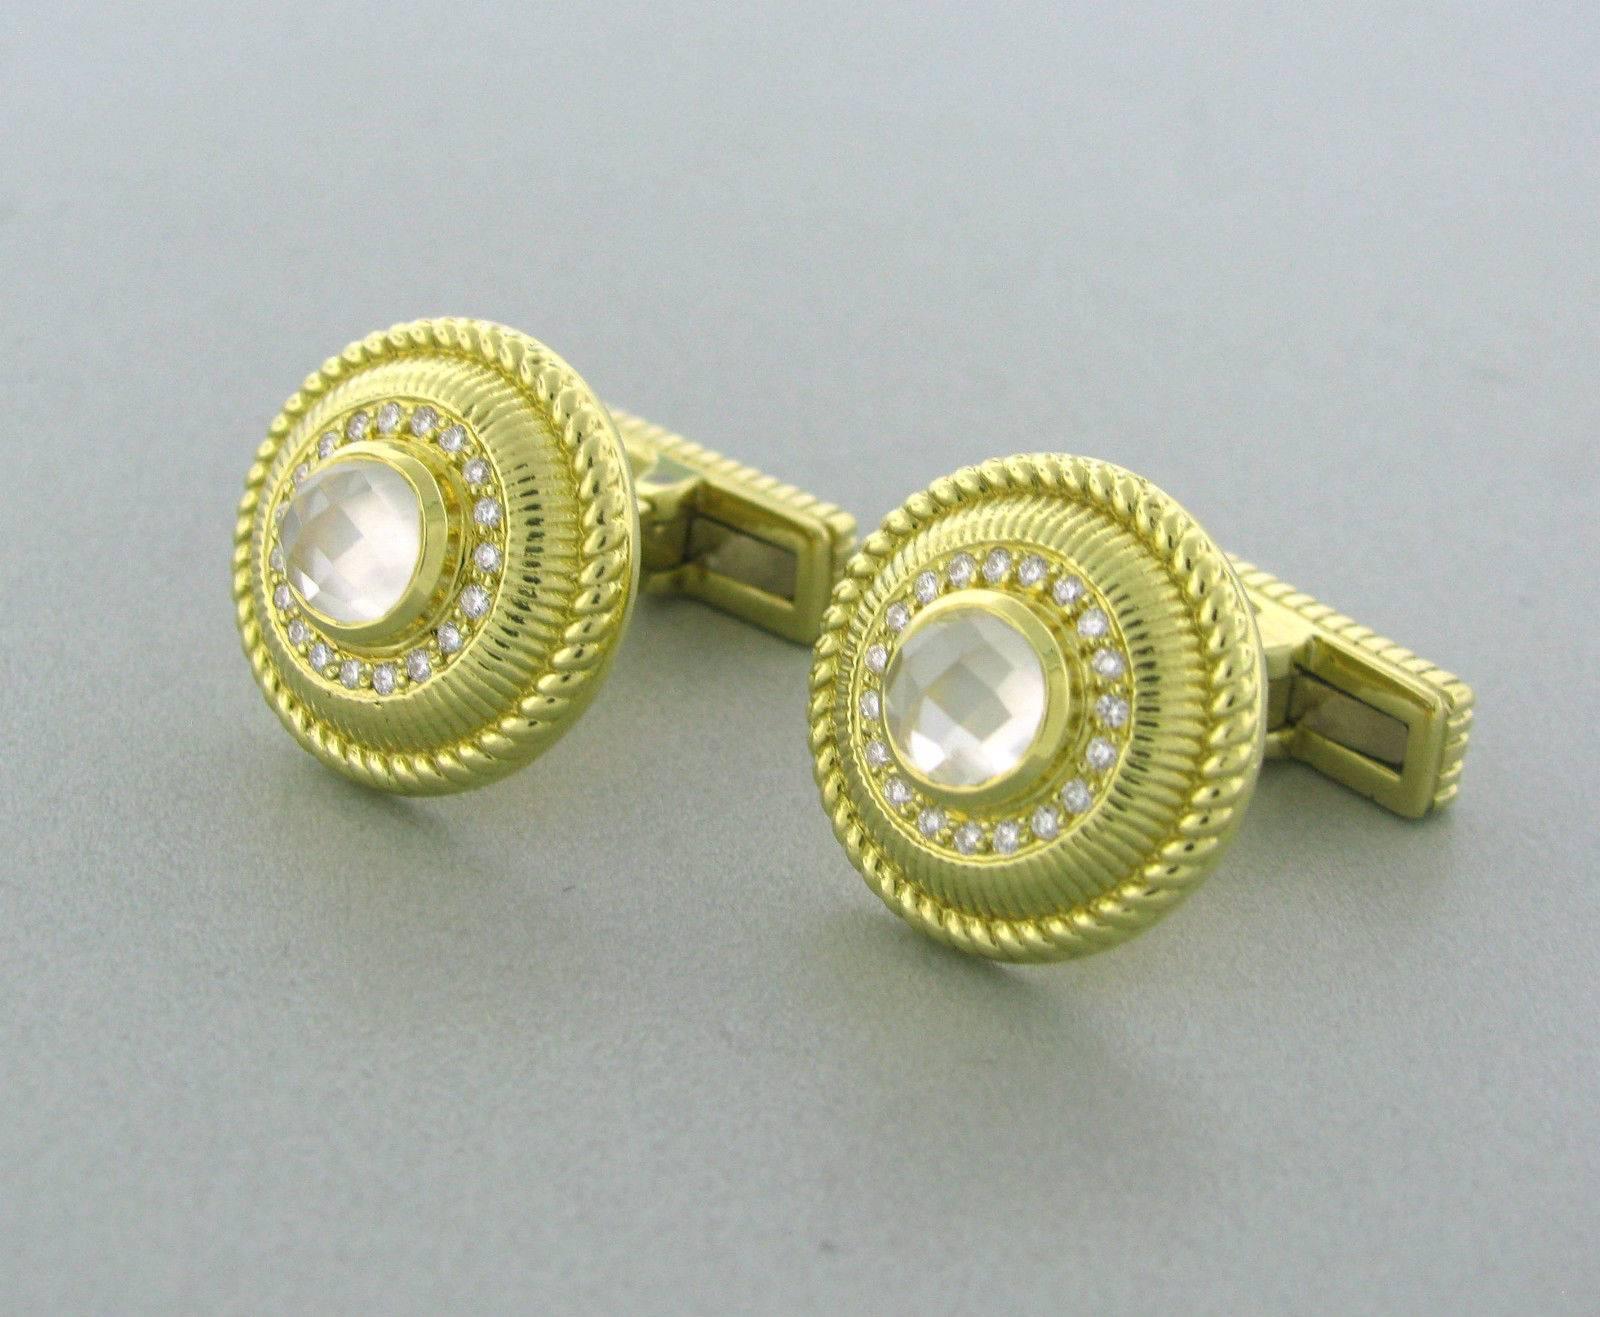 A pair of 18k yellow gold round cufflinks, designed by Judith Ripka, set with crystal in the center, surrounded with approx. 0.40ctw in diamonds. Cufflink top is 18mm in diameter.Marked: Judith Ripka 18k. Weight - 17.9 grams 